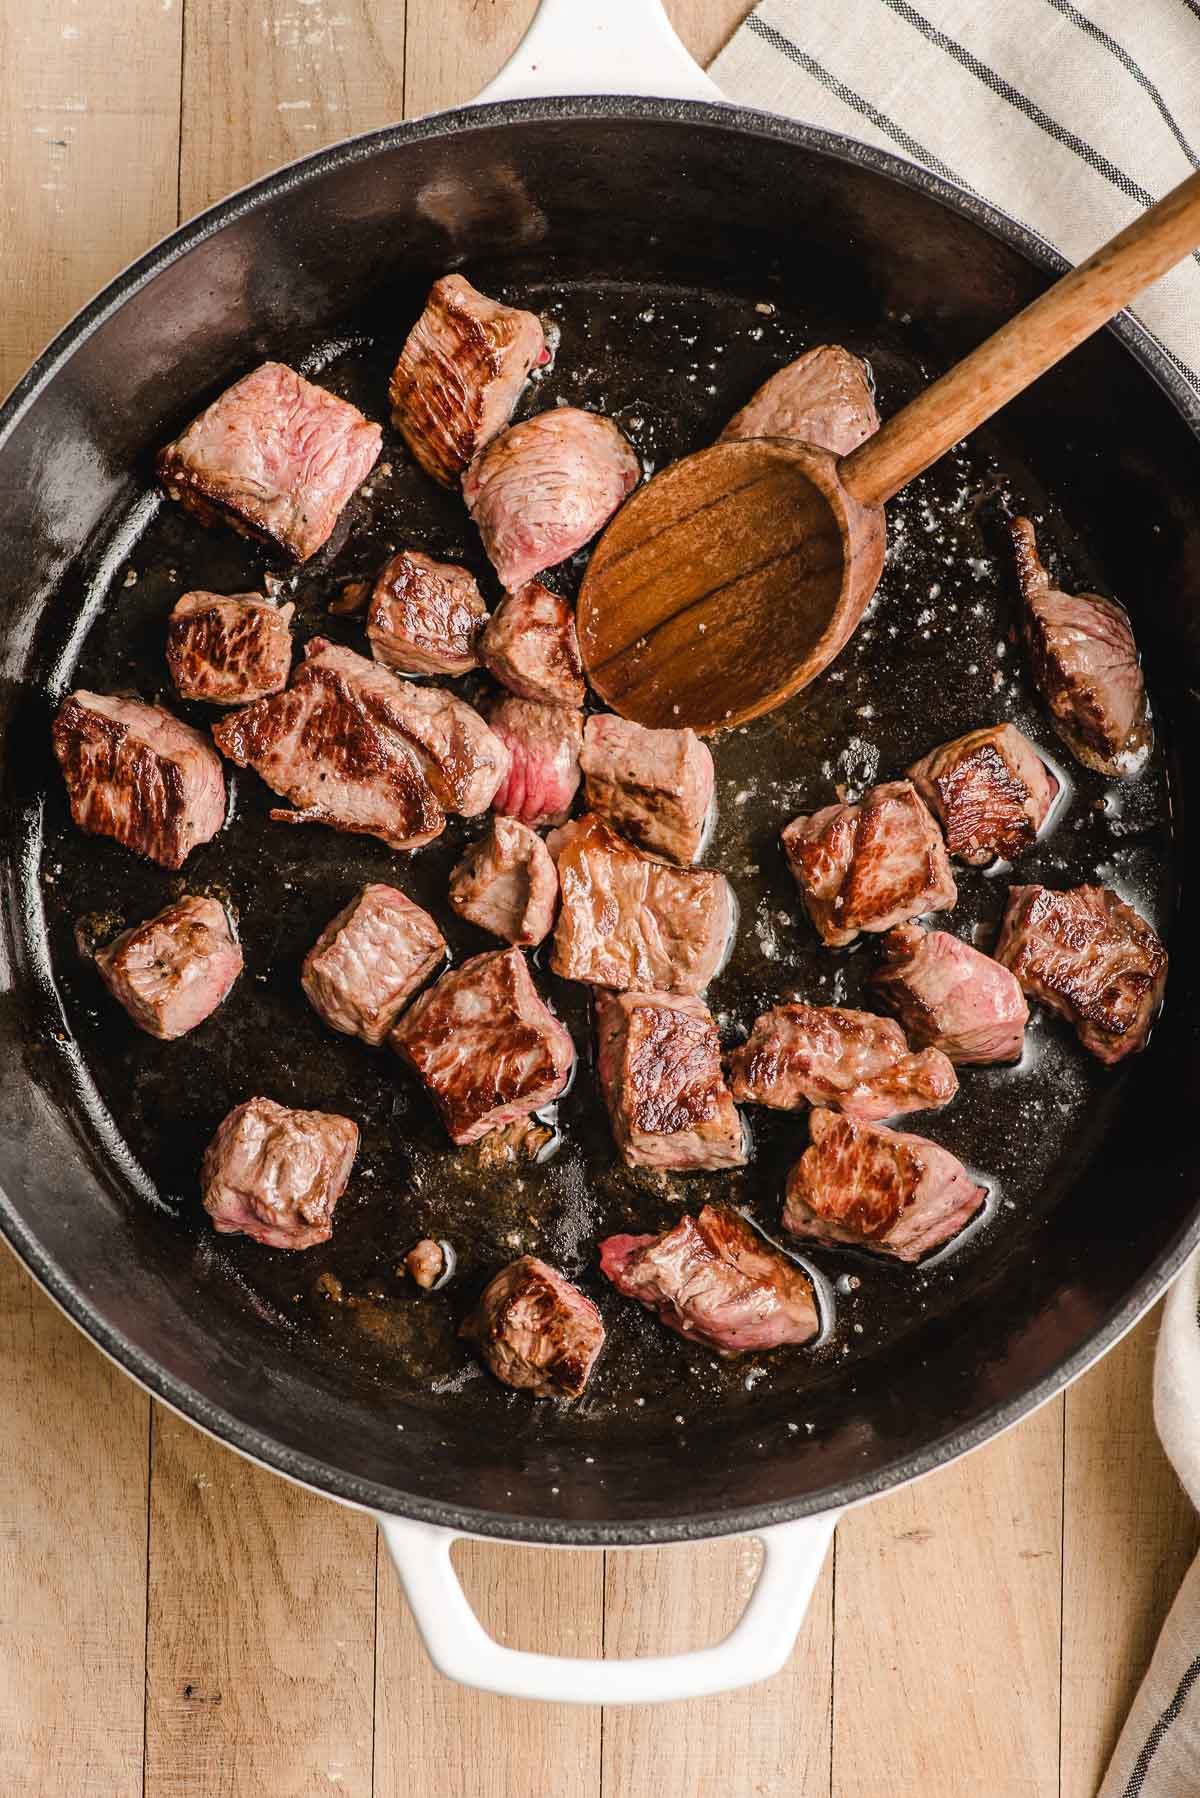 Steak bites being seared in a cast iron skillet.